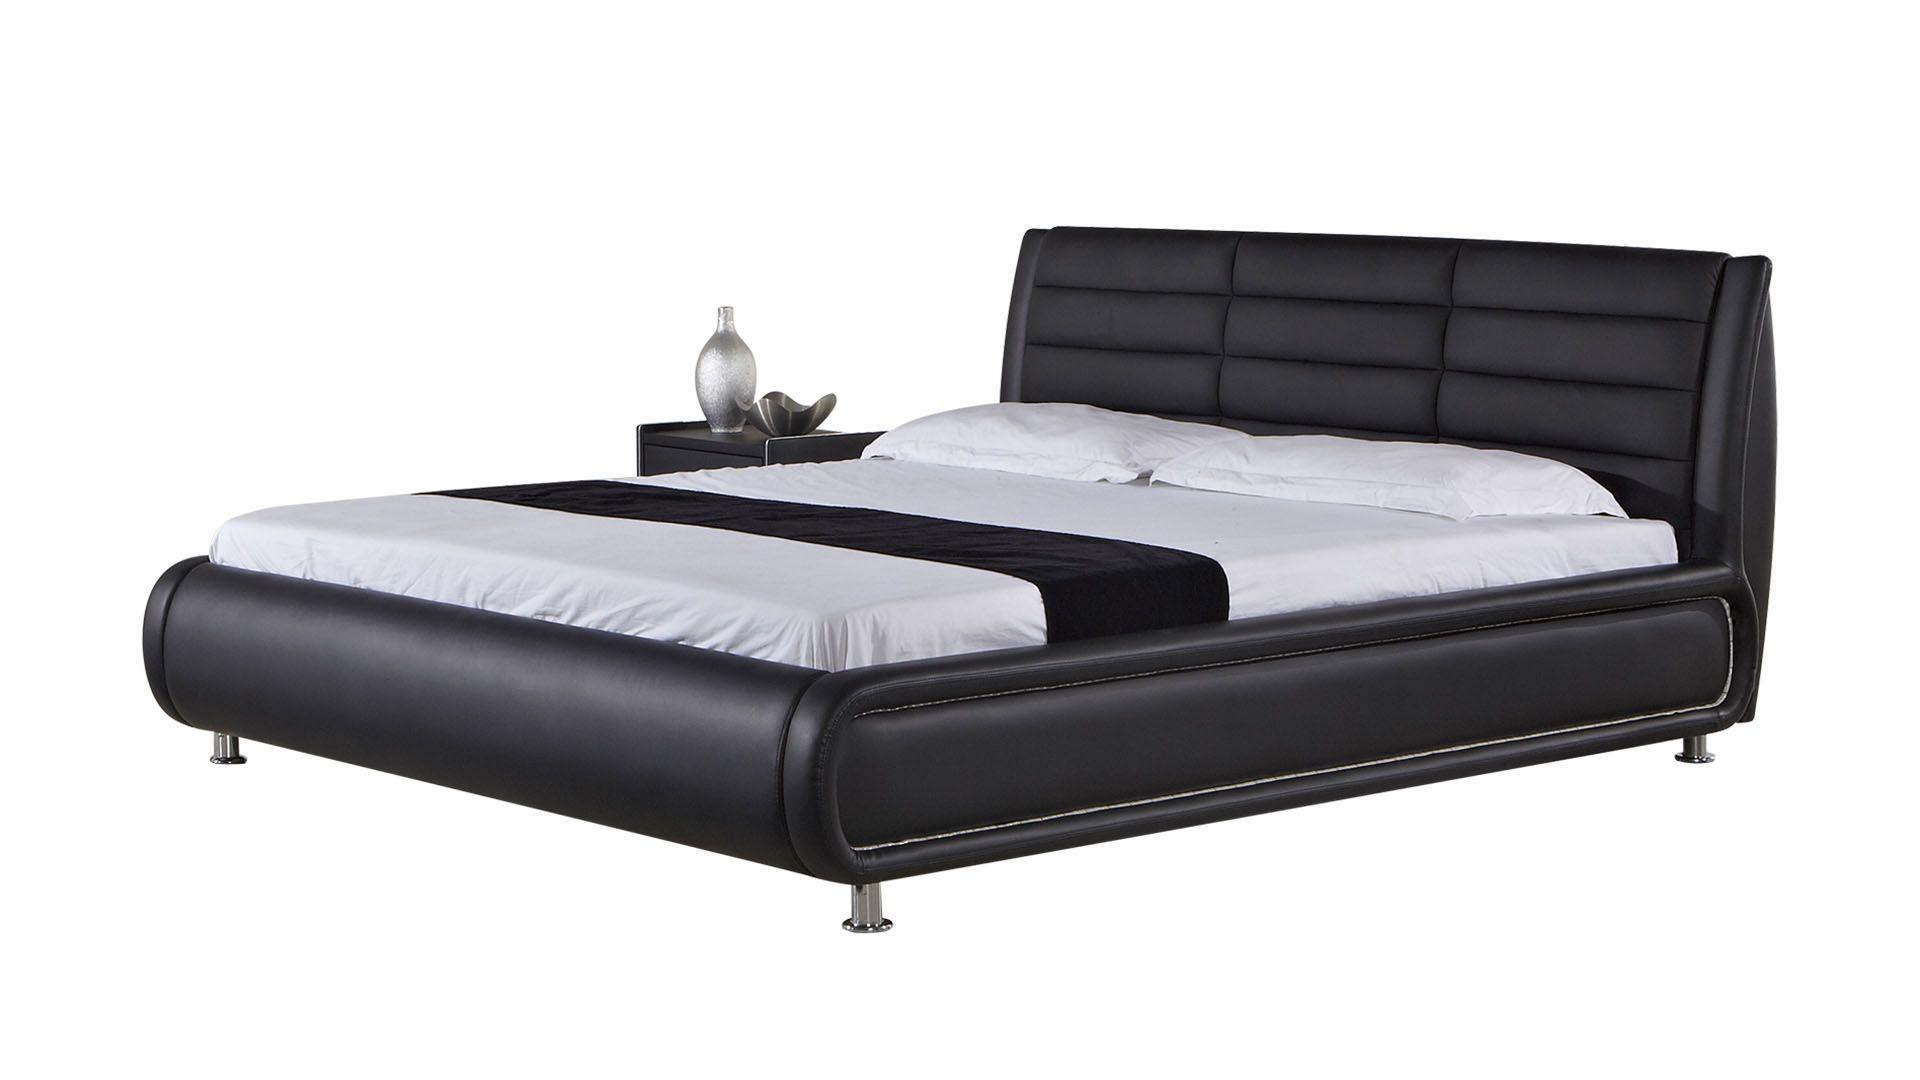 

    
Black Faux Leather Queen Size Bed w/ LED Light American Eagle B-D019-BK
